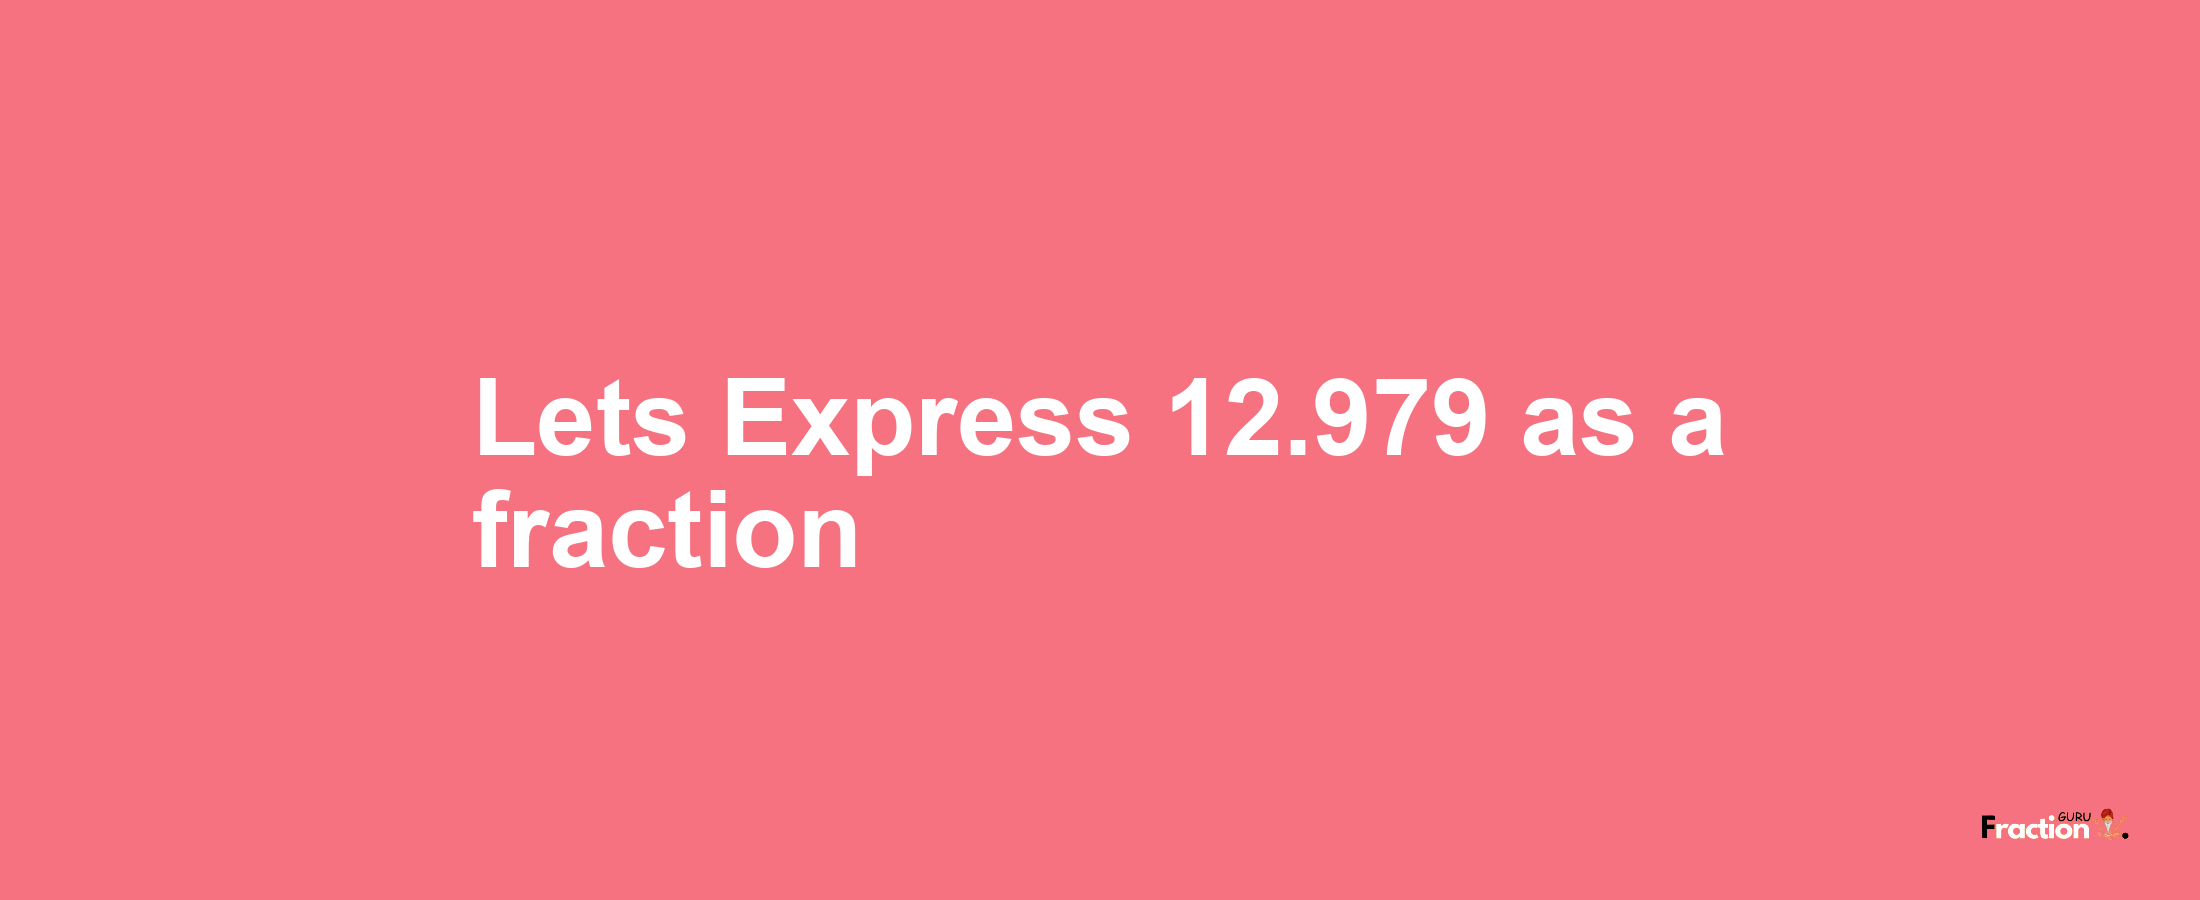 Lets Express 12.979 as afraction